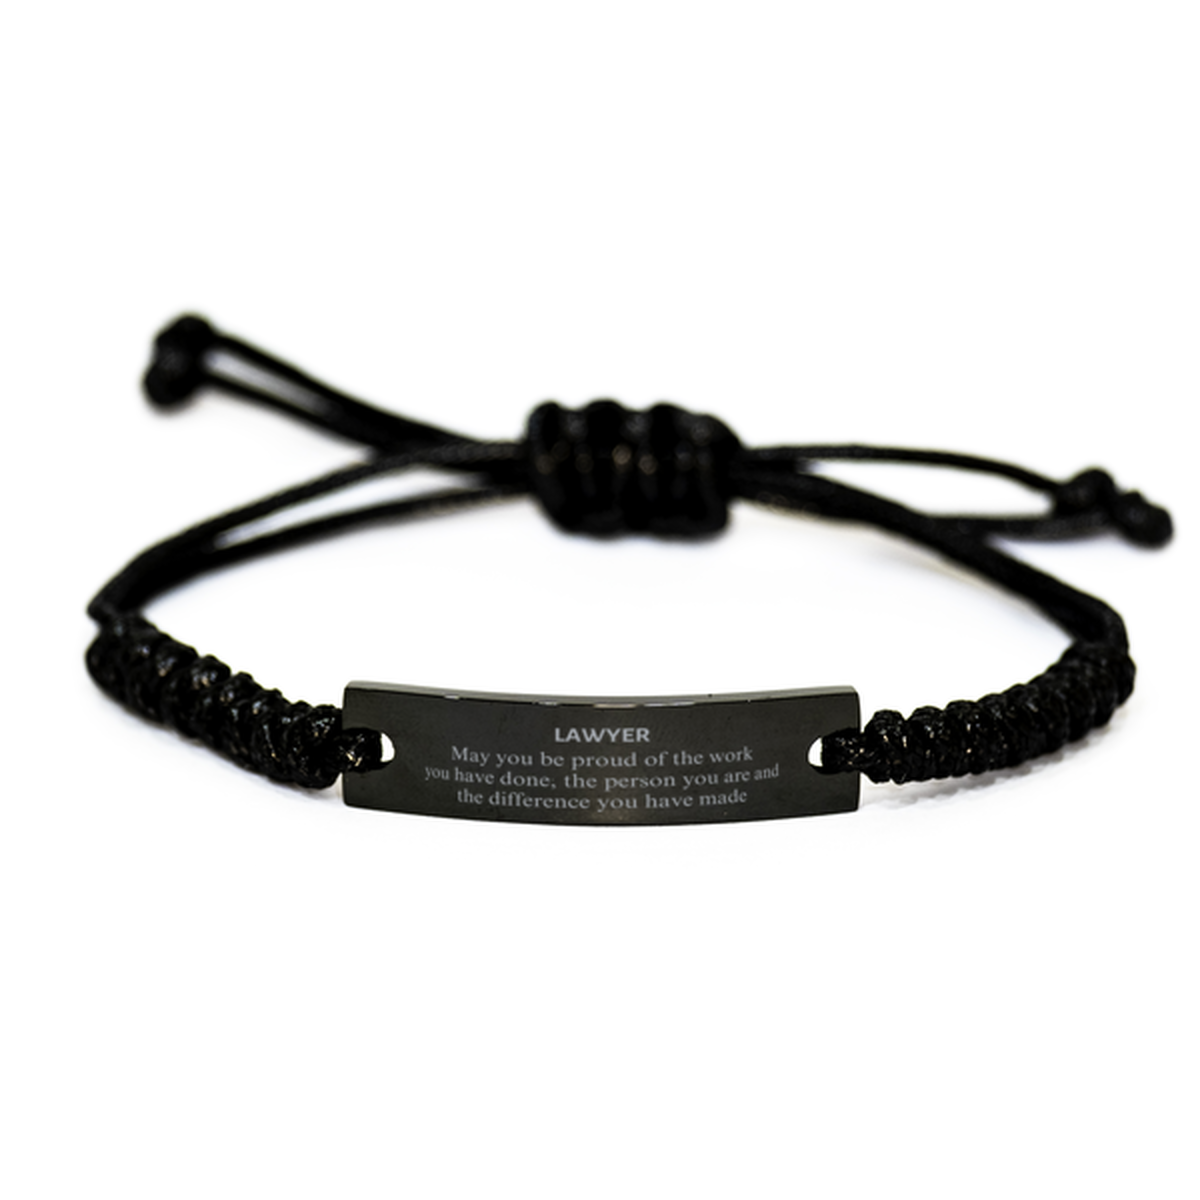 Lawyer May you be proud of the work you have done, Retirement Lawyer Black Rope Bracelet for Colleague Appreciation Gifts Amazing for Lawyer